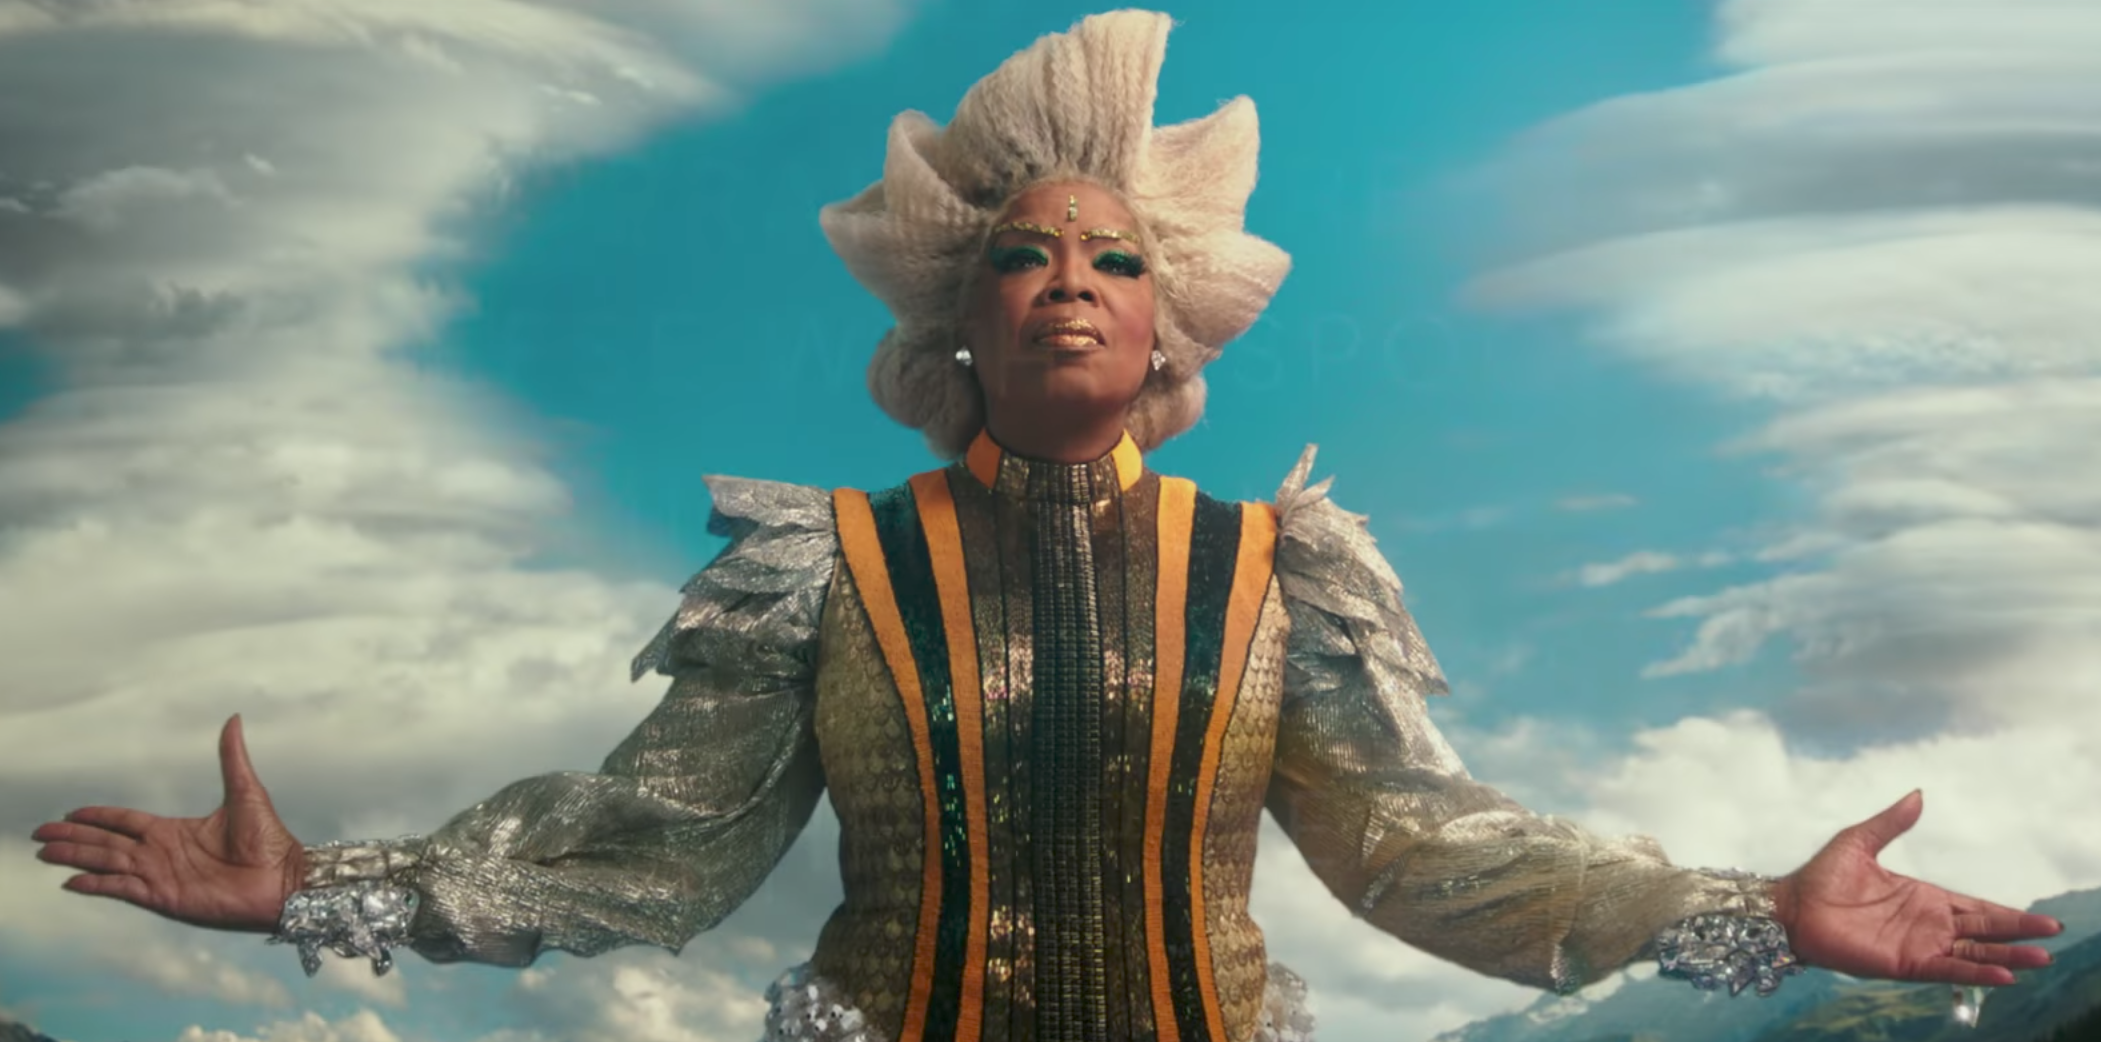 The First Trailer for A Wrinkle in Time Is Everything You Hoped and More
